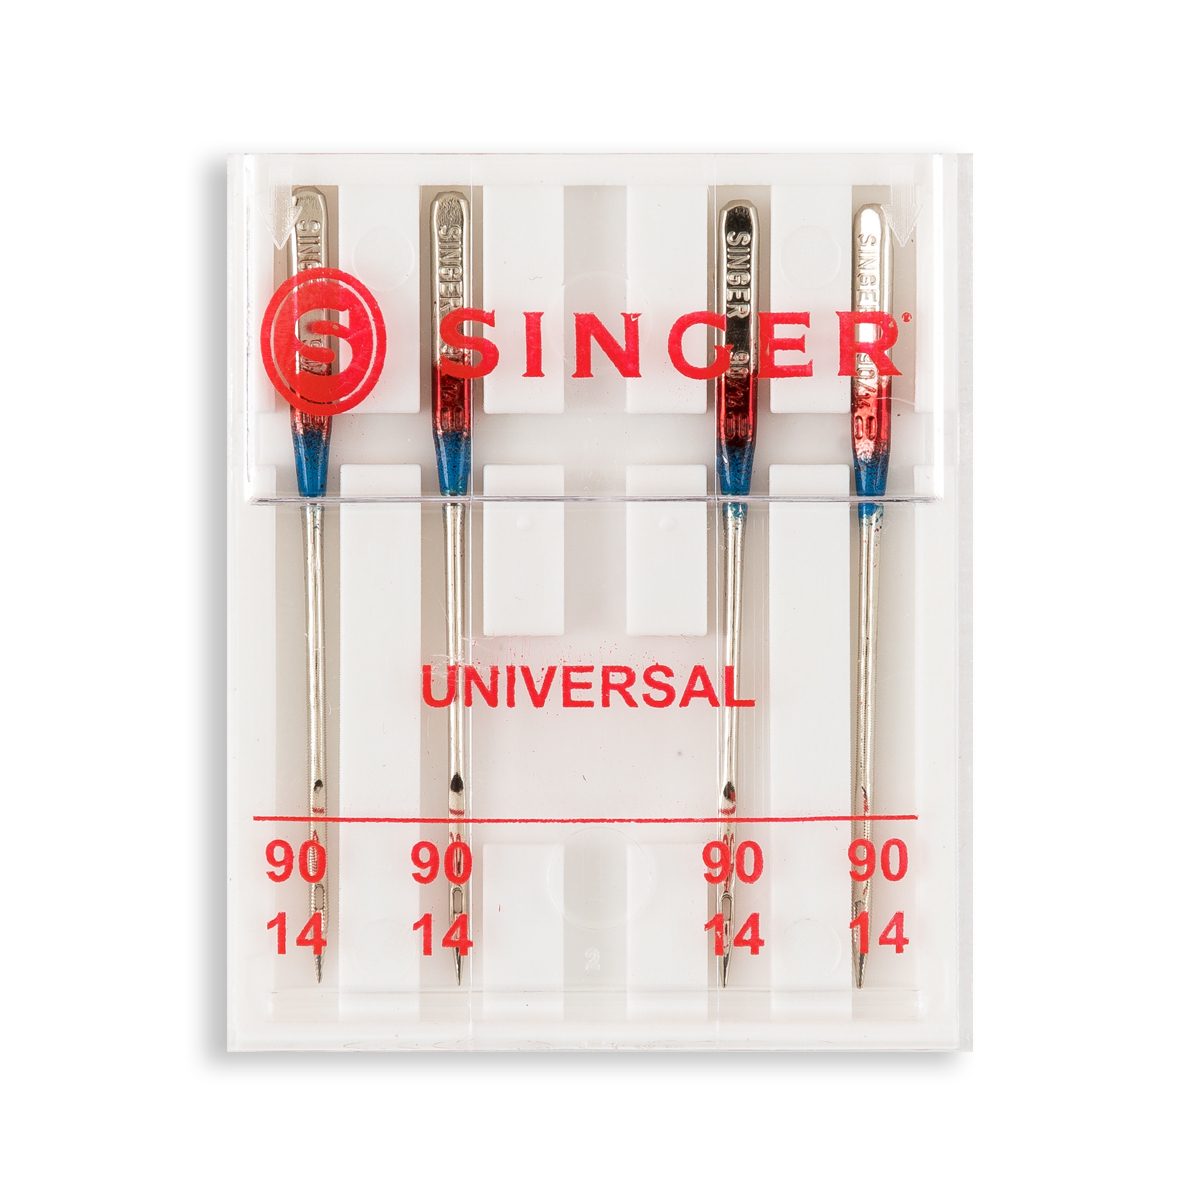 3 packs Universal Domestic Sewing Machine Needles Pack 90/14 (4 x 90/14 and  1 x 2mm Twin Needle)